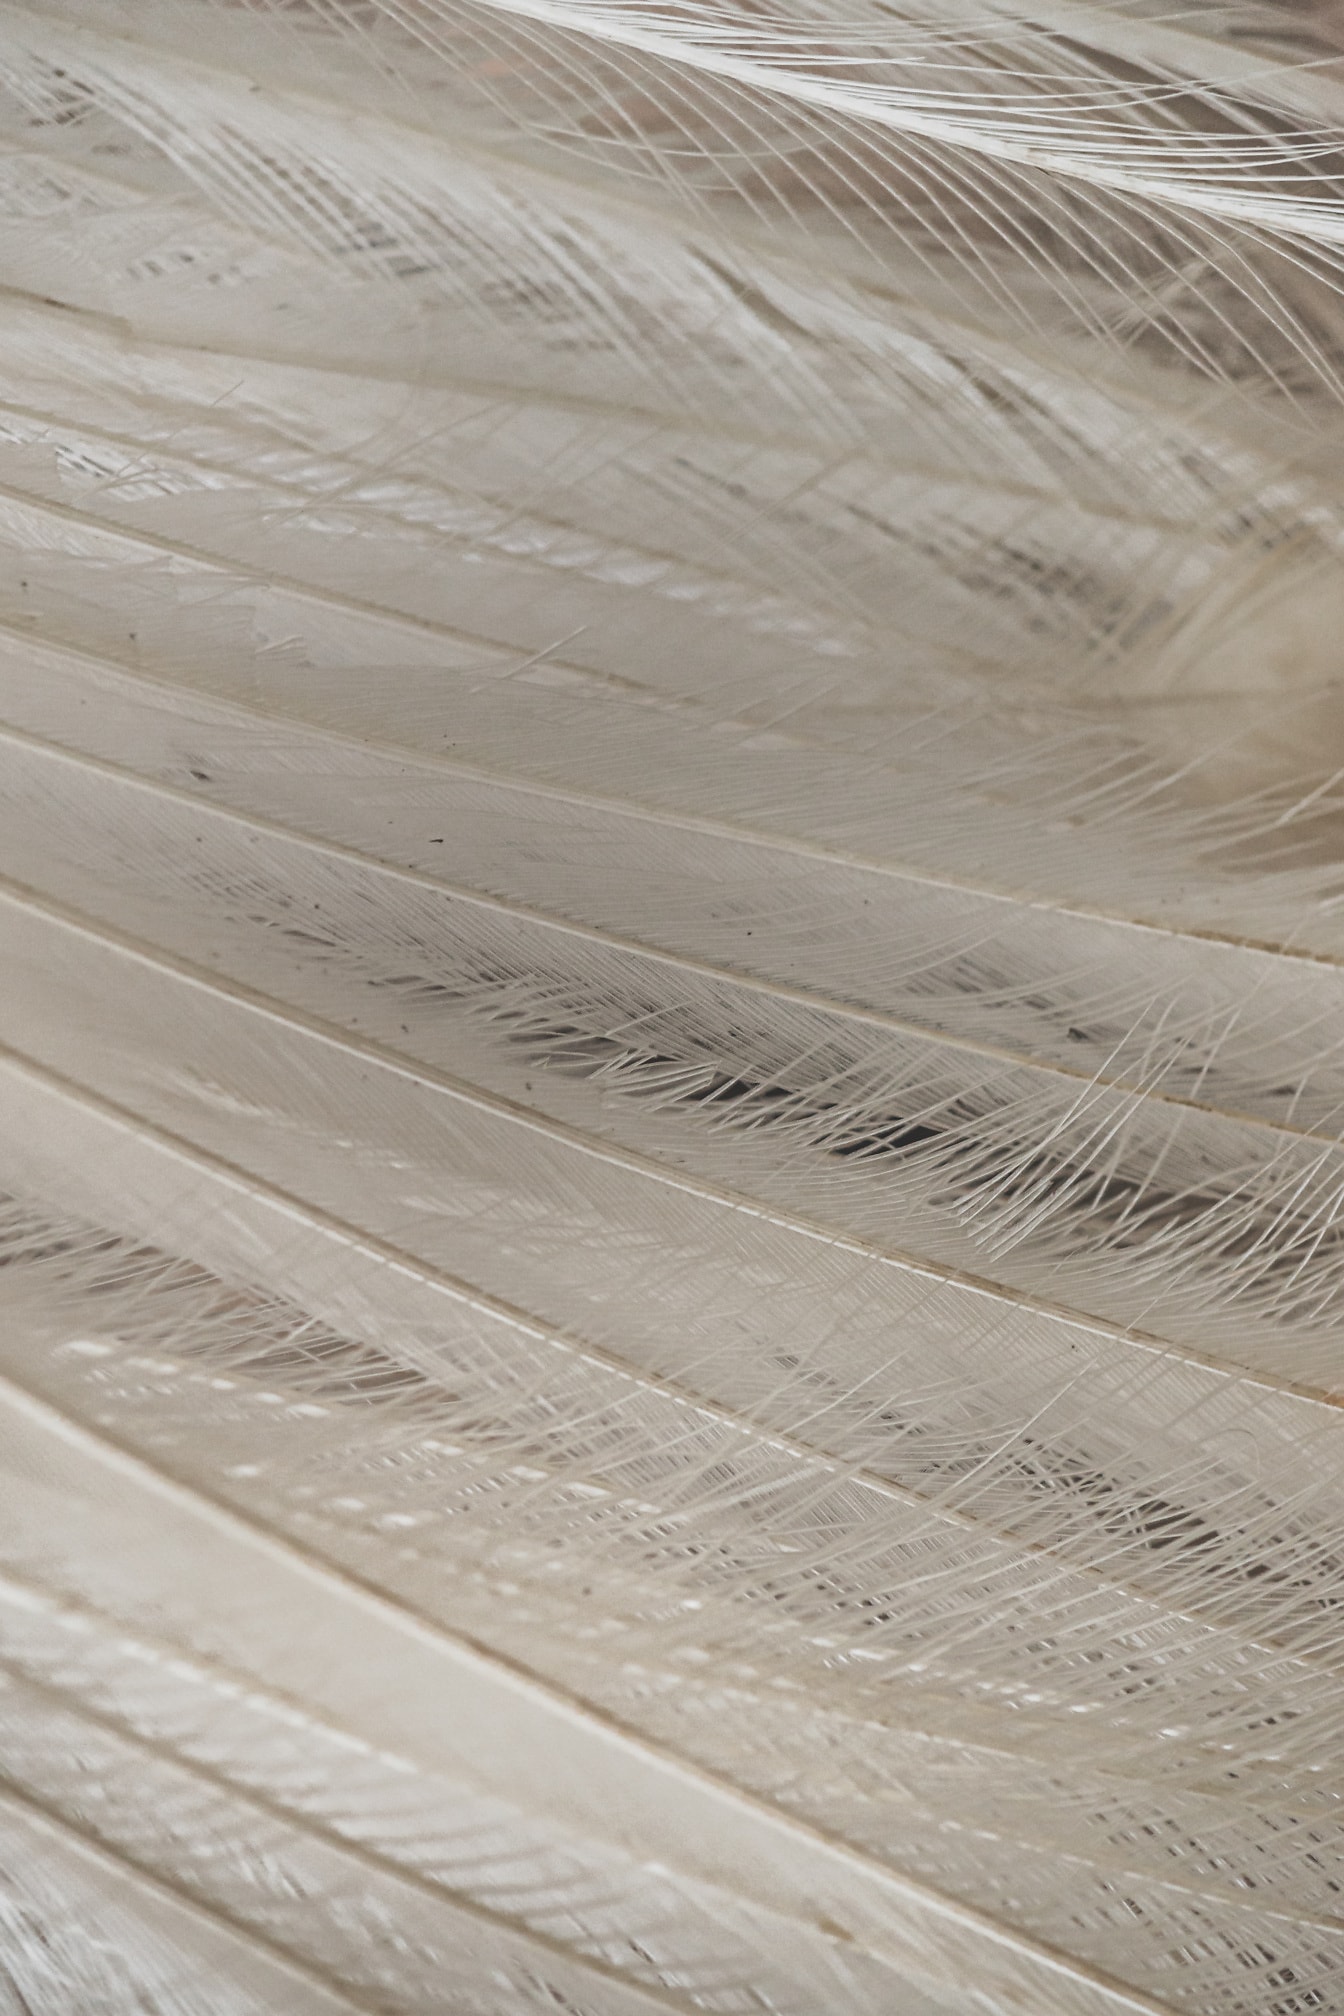 White feathers close-up texture